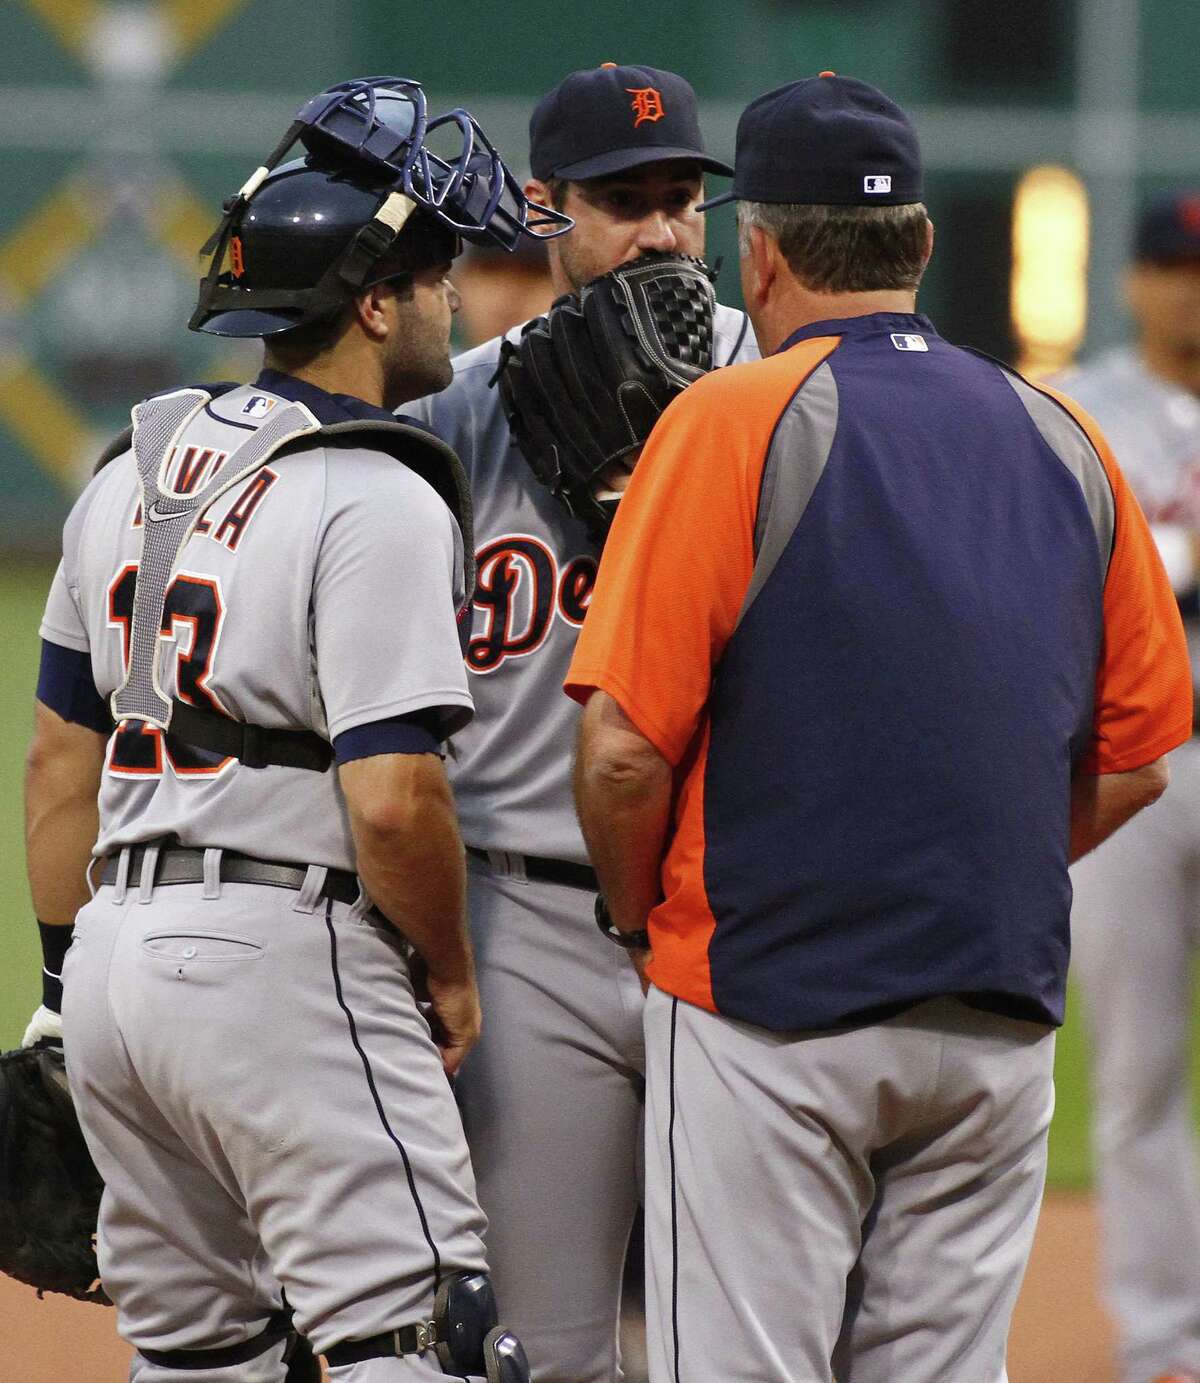 PITTSBURGH, PA - AUGUST 11: Pitcher Justin Verlander #35 of the Detroit Tigers and catcher Alex Avila #13 talk with pitching coach Jeff Jones #51 of the Detroit Tigers in the first inning against the Pittsburgh Pirates during inter-league play at PNC Park on August 11, 2014 in Pittsburgh, Pennsylvania.